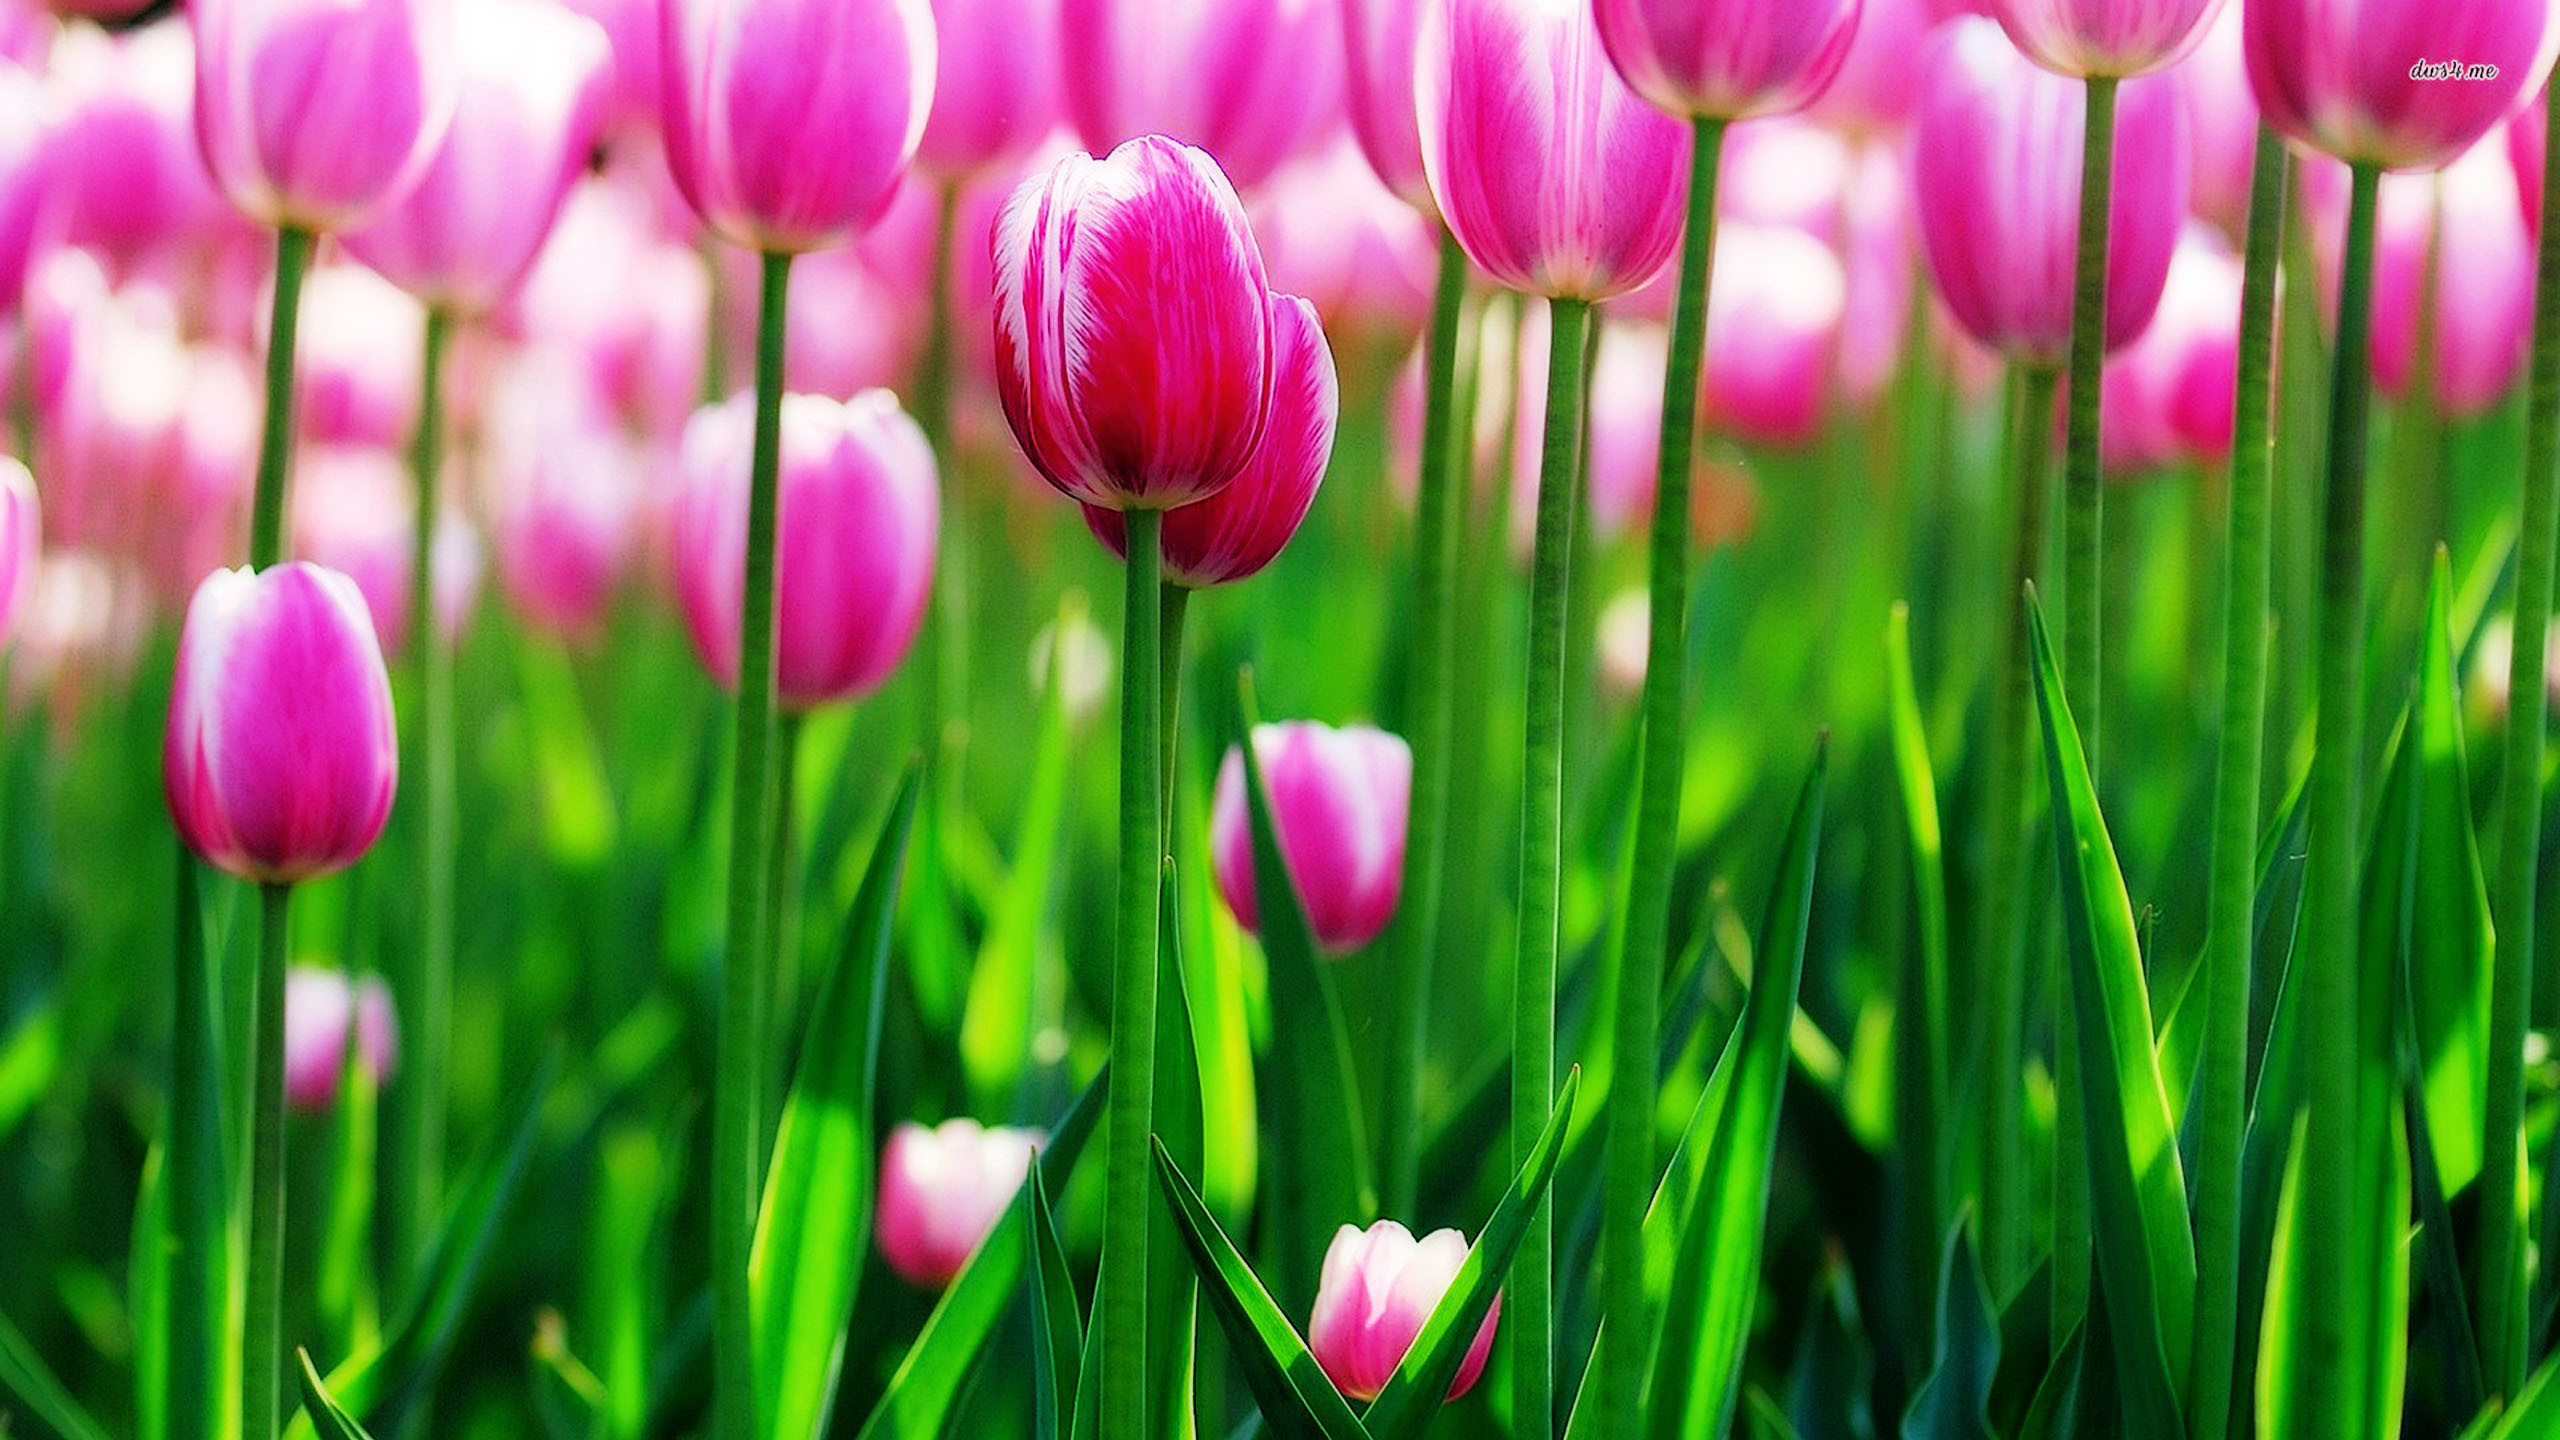 Tulips Background Wallpaper (70+ images)